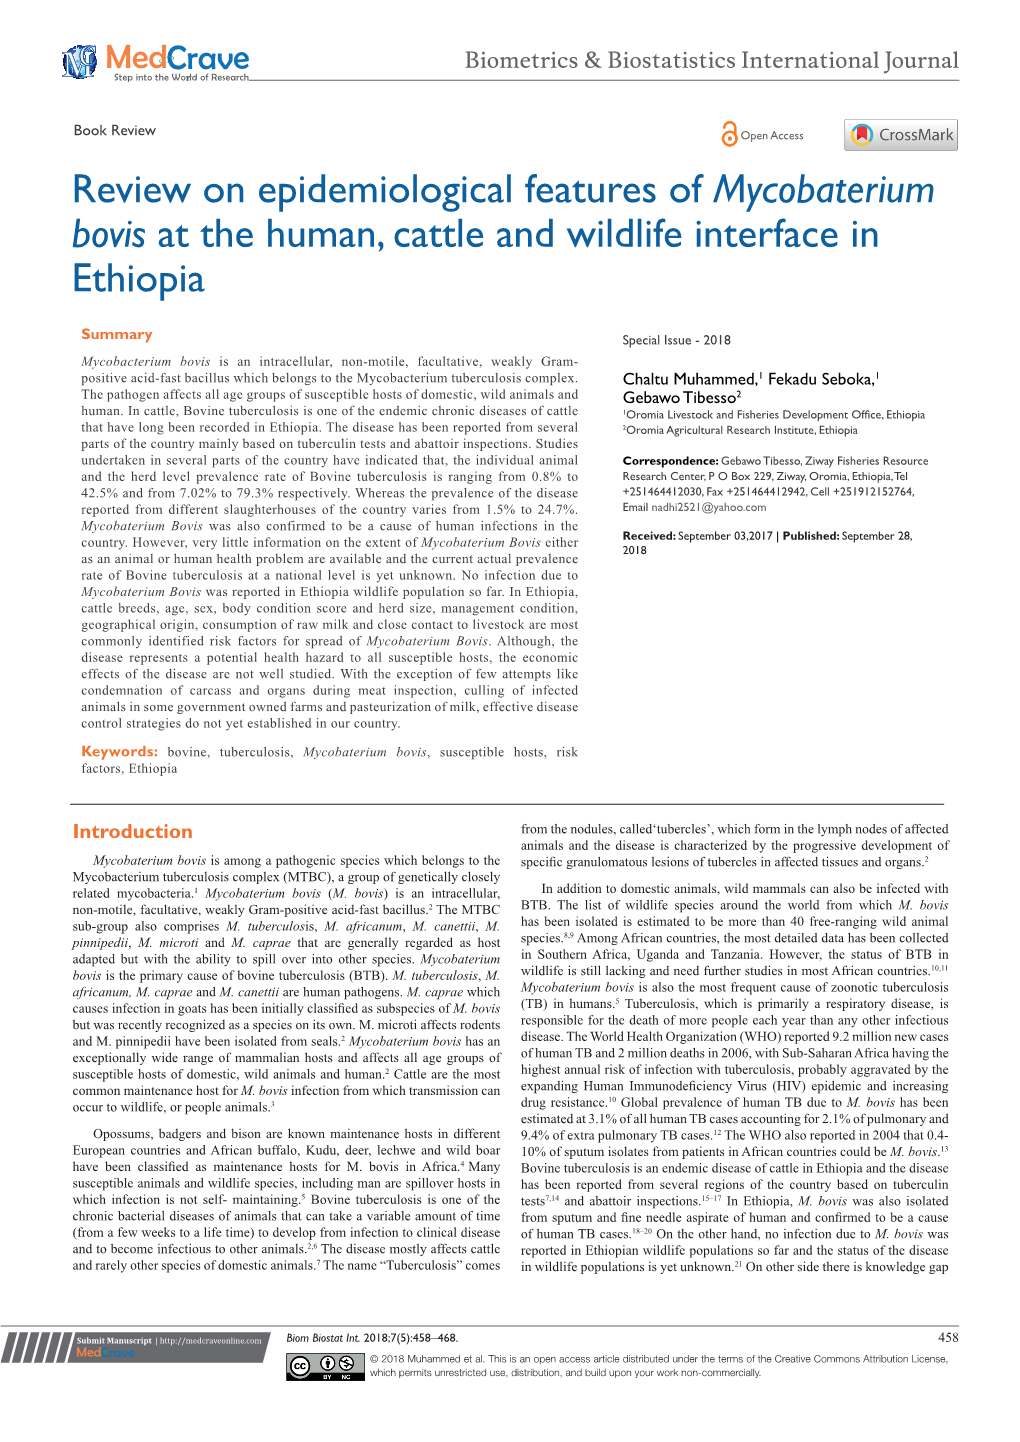 Review on Epidemiological Features of Mycobaterium Bovis at the Human, Cattle and Wildlife Interface in Ethiopia